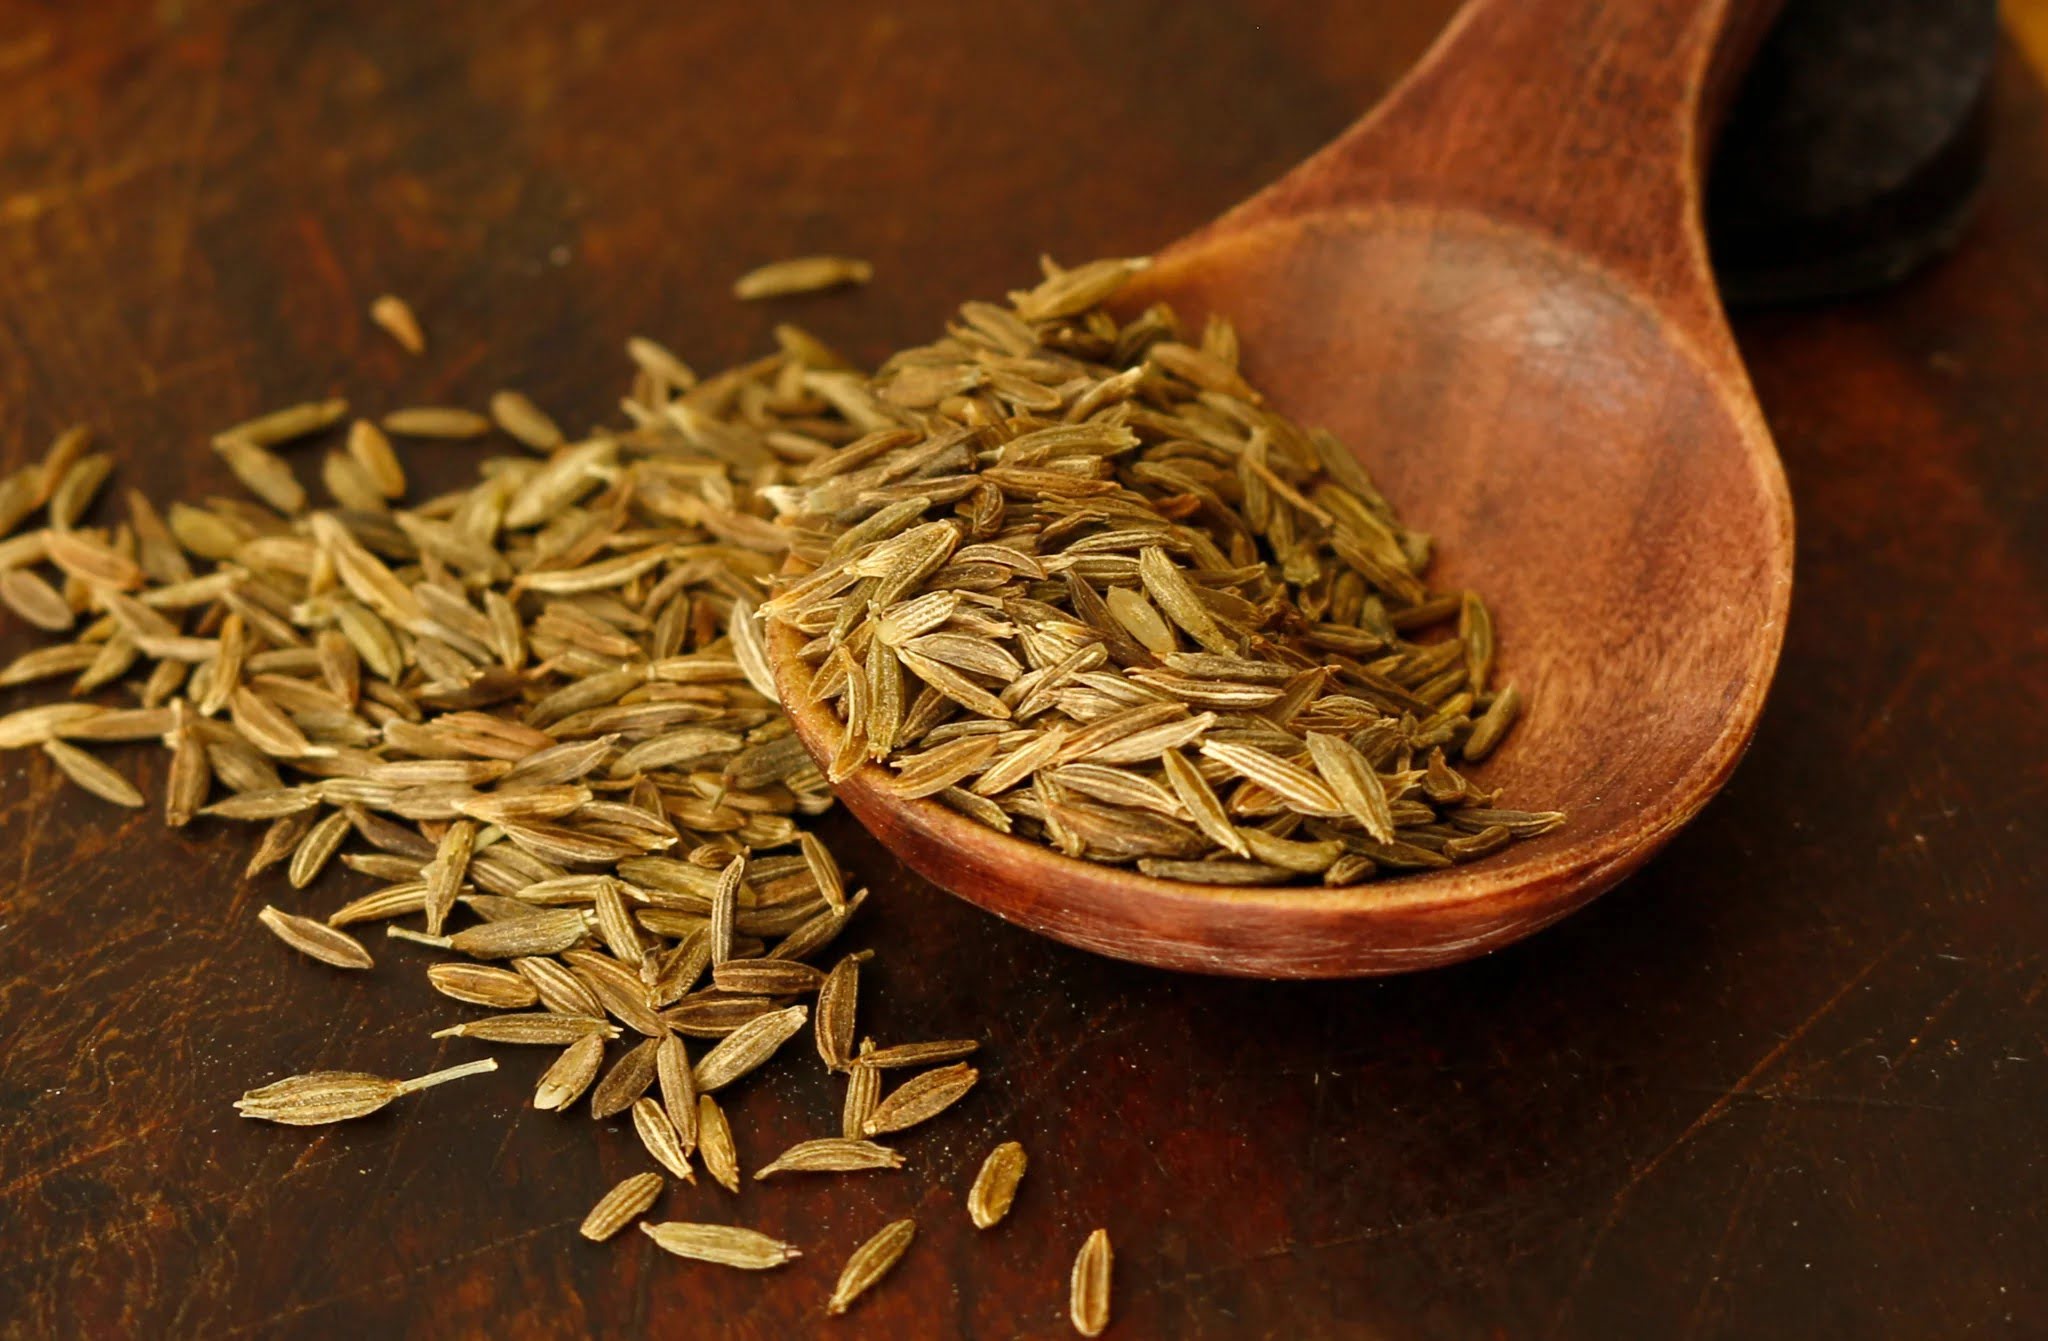 Where Does Cumin Seed Come From